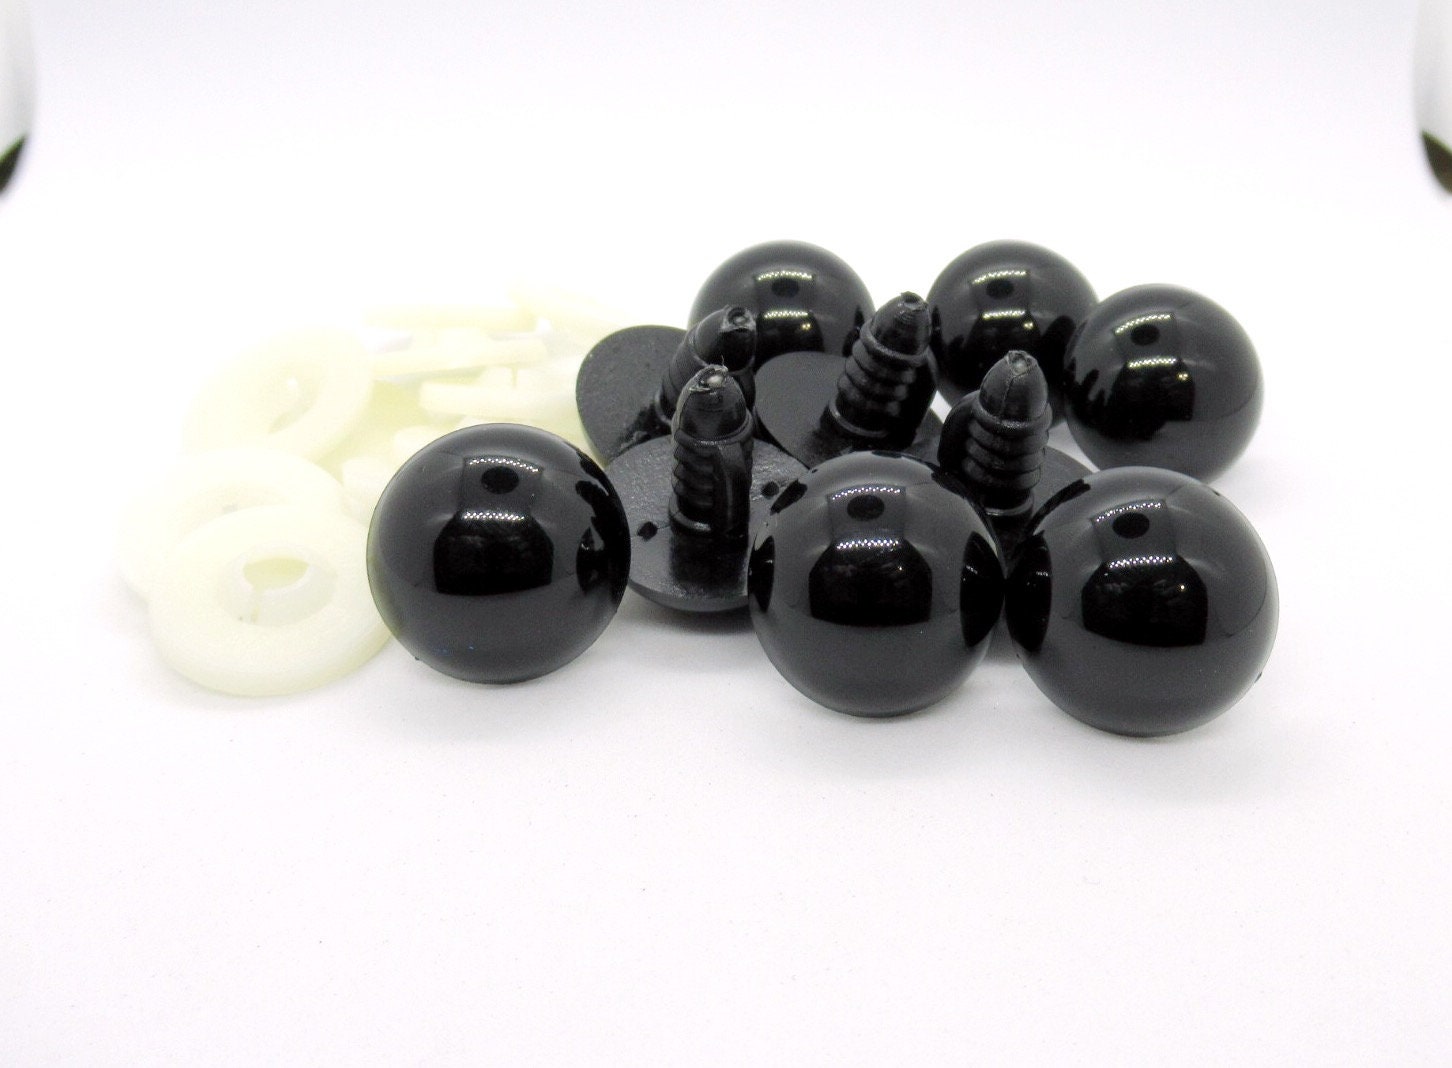 Hengxinc Pack of 220 Safety Eyes for Crochet Animals Black